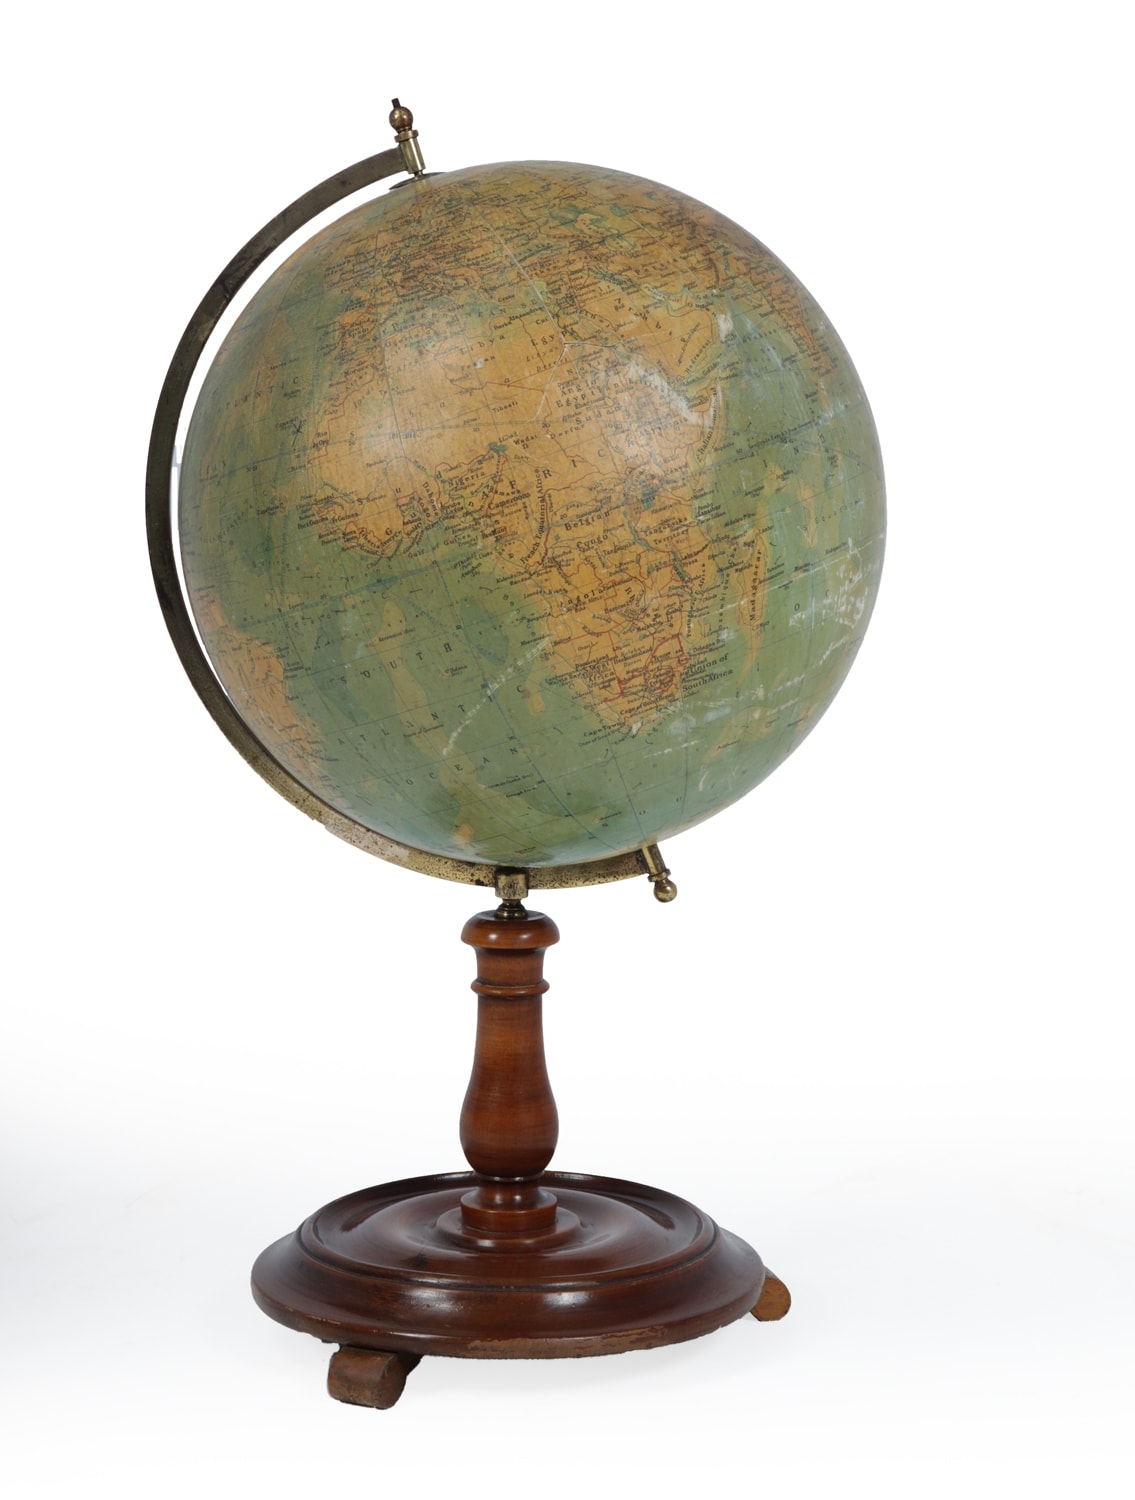 Philips 14 inch Terrestrial Globe c1920 – The Furniture Rooms